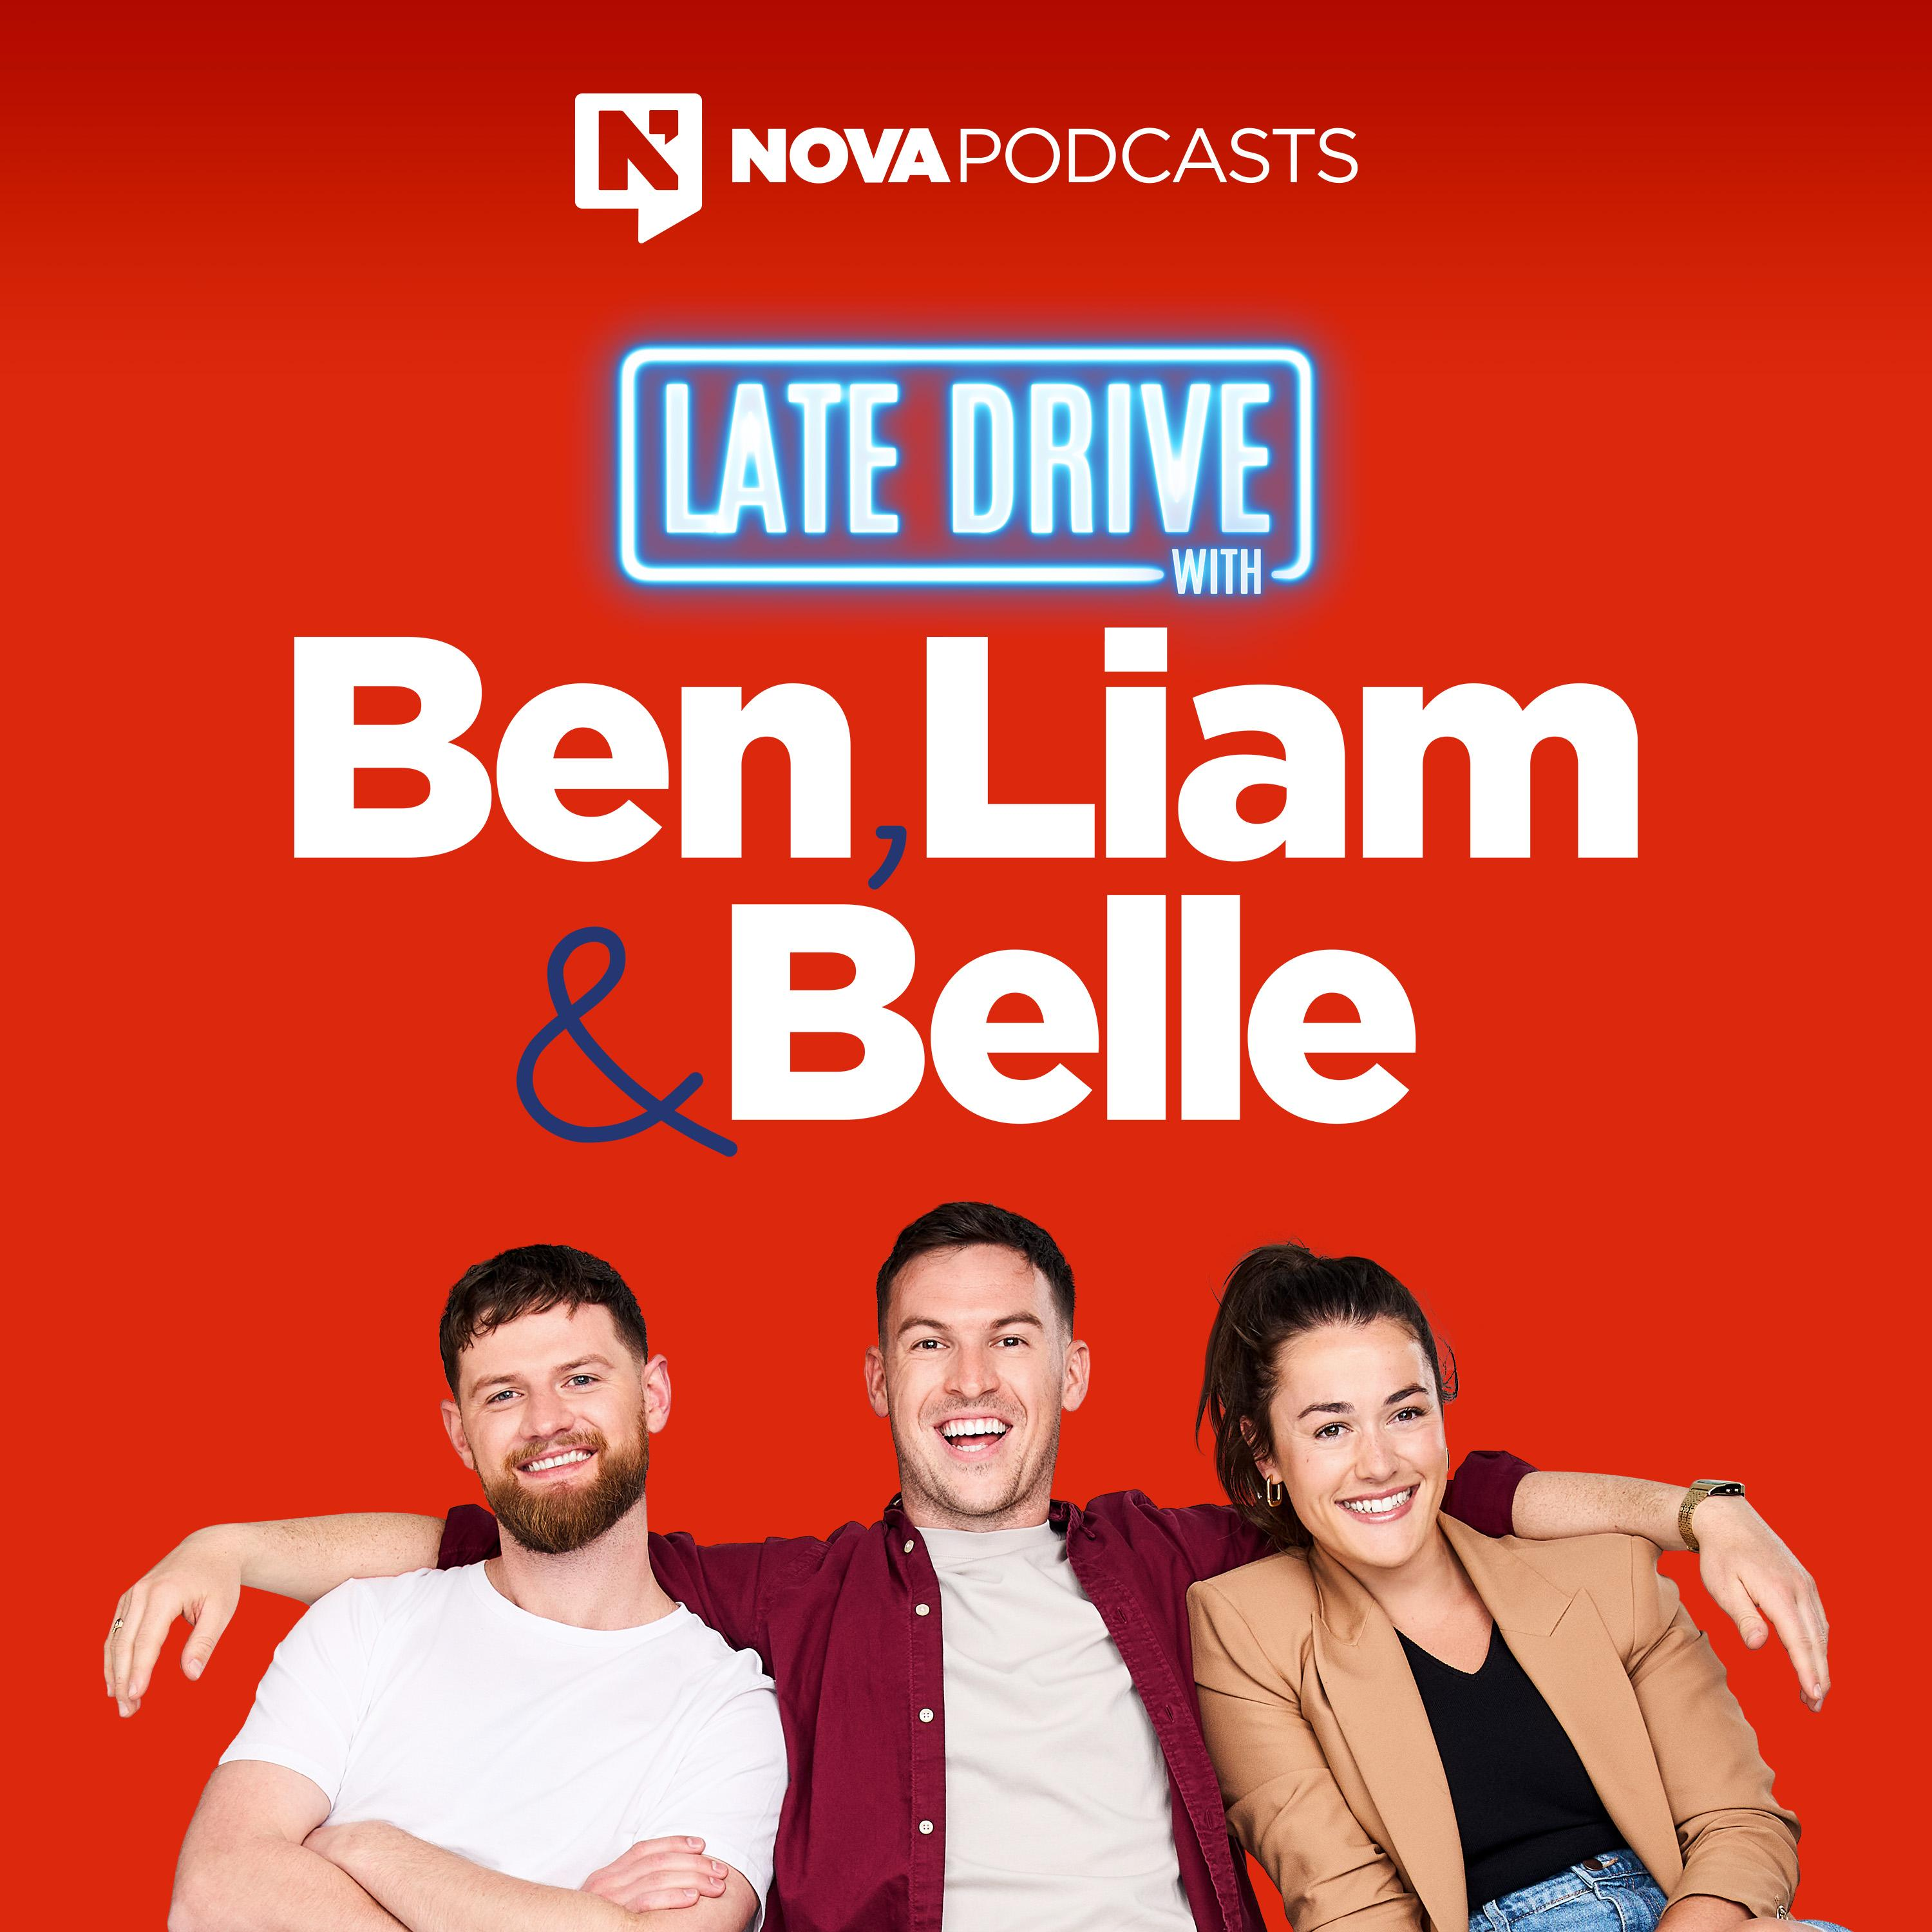 🎙️FULL SHOW: Ben Exclusively Raw-Dogs